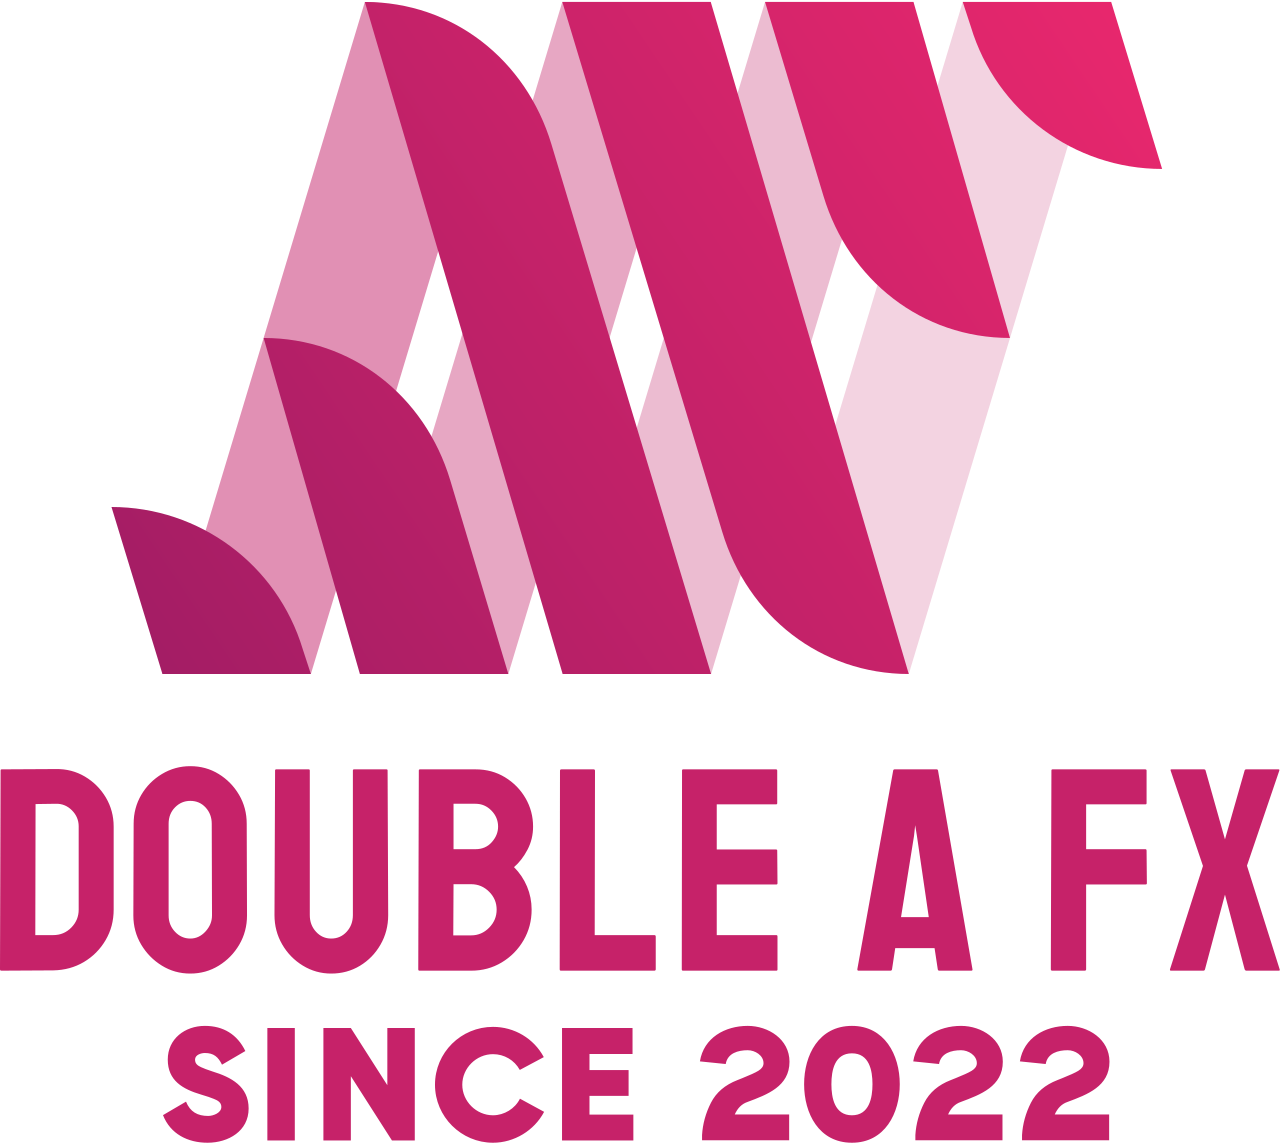 DOUBLE A FX's web page